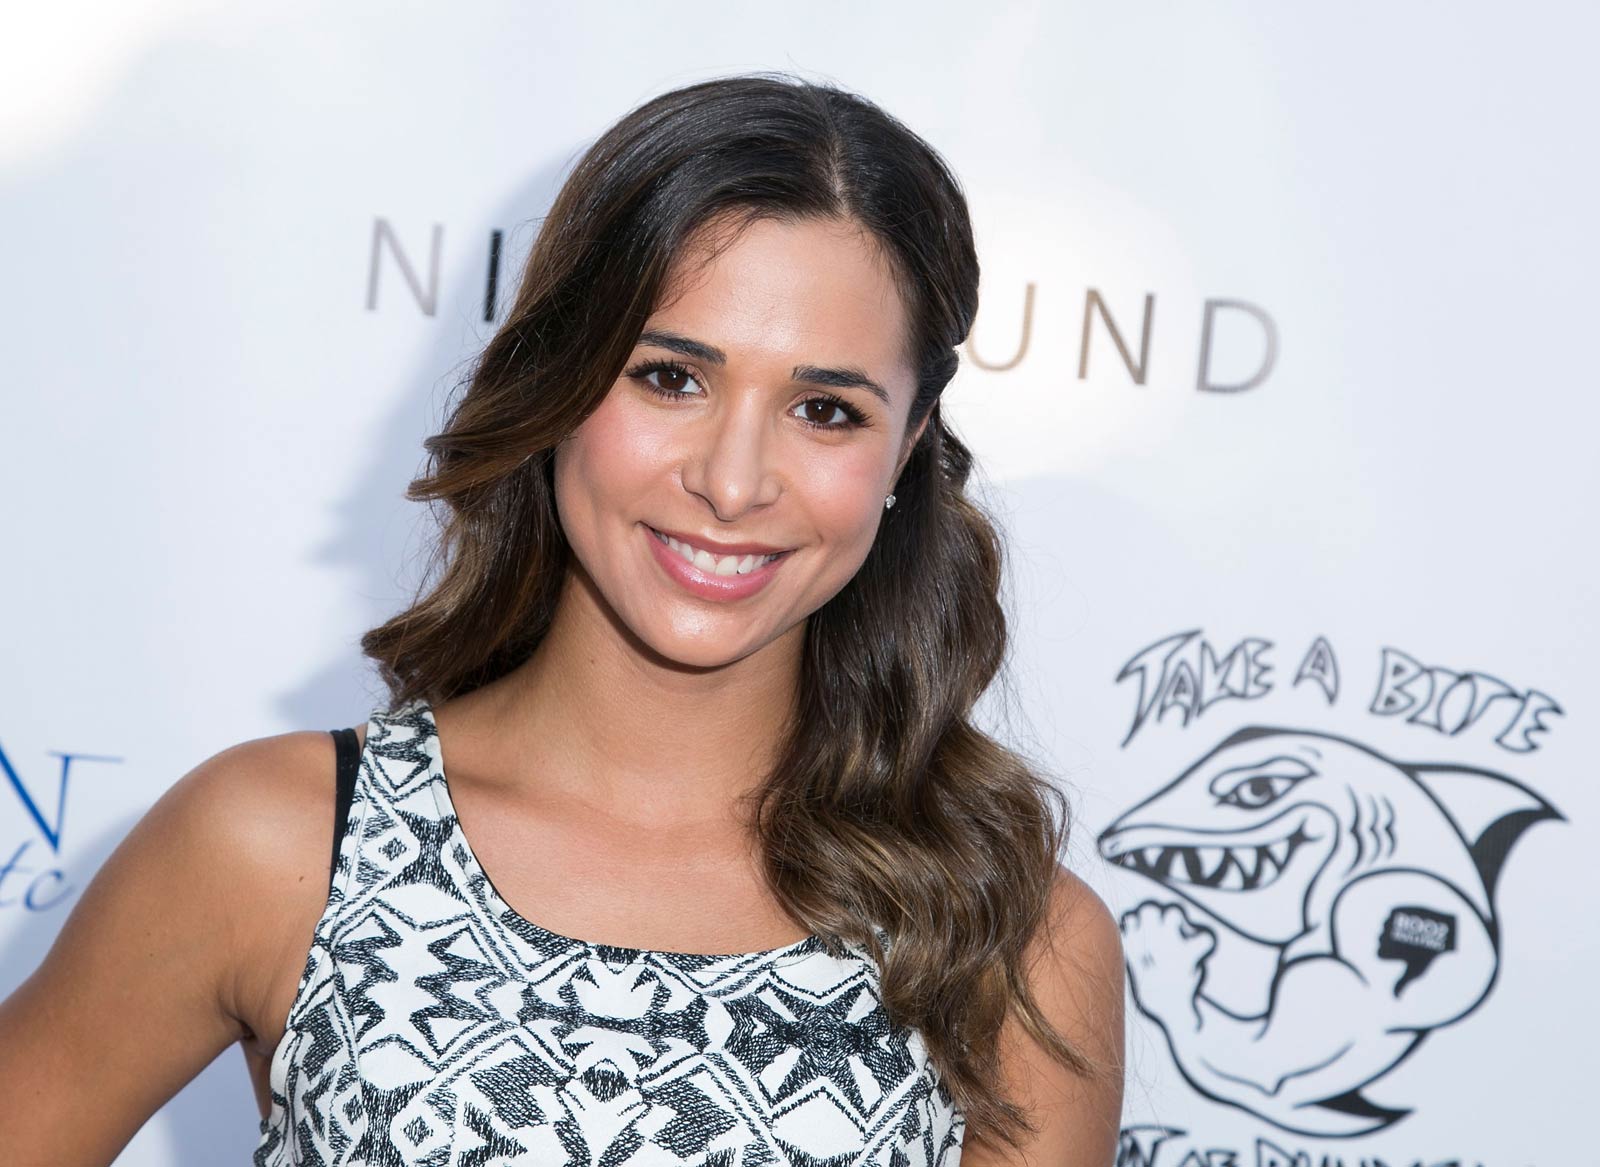 Josie Loren attends the BOO2bullying’s Take A Bite Out Of Bullying launch